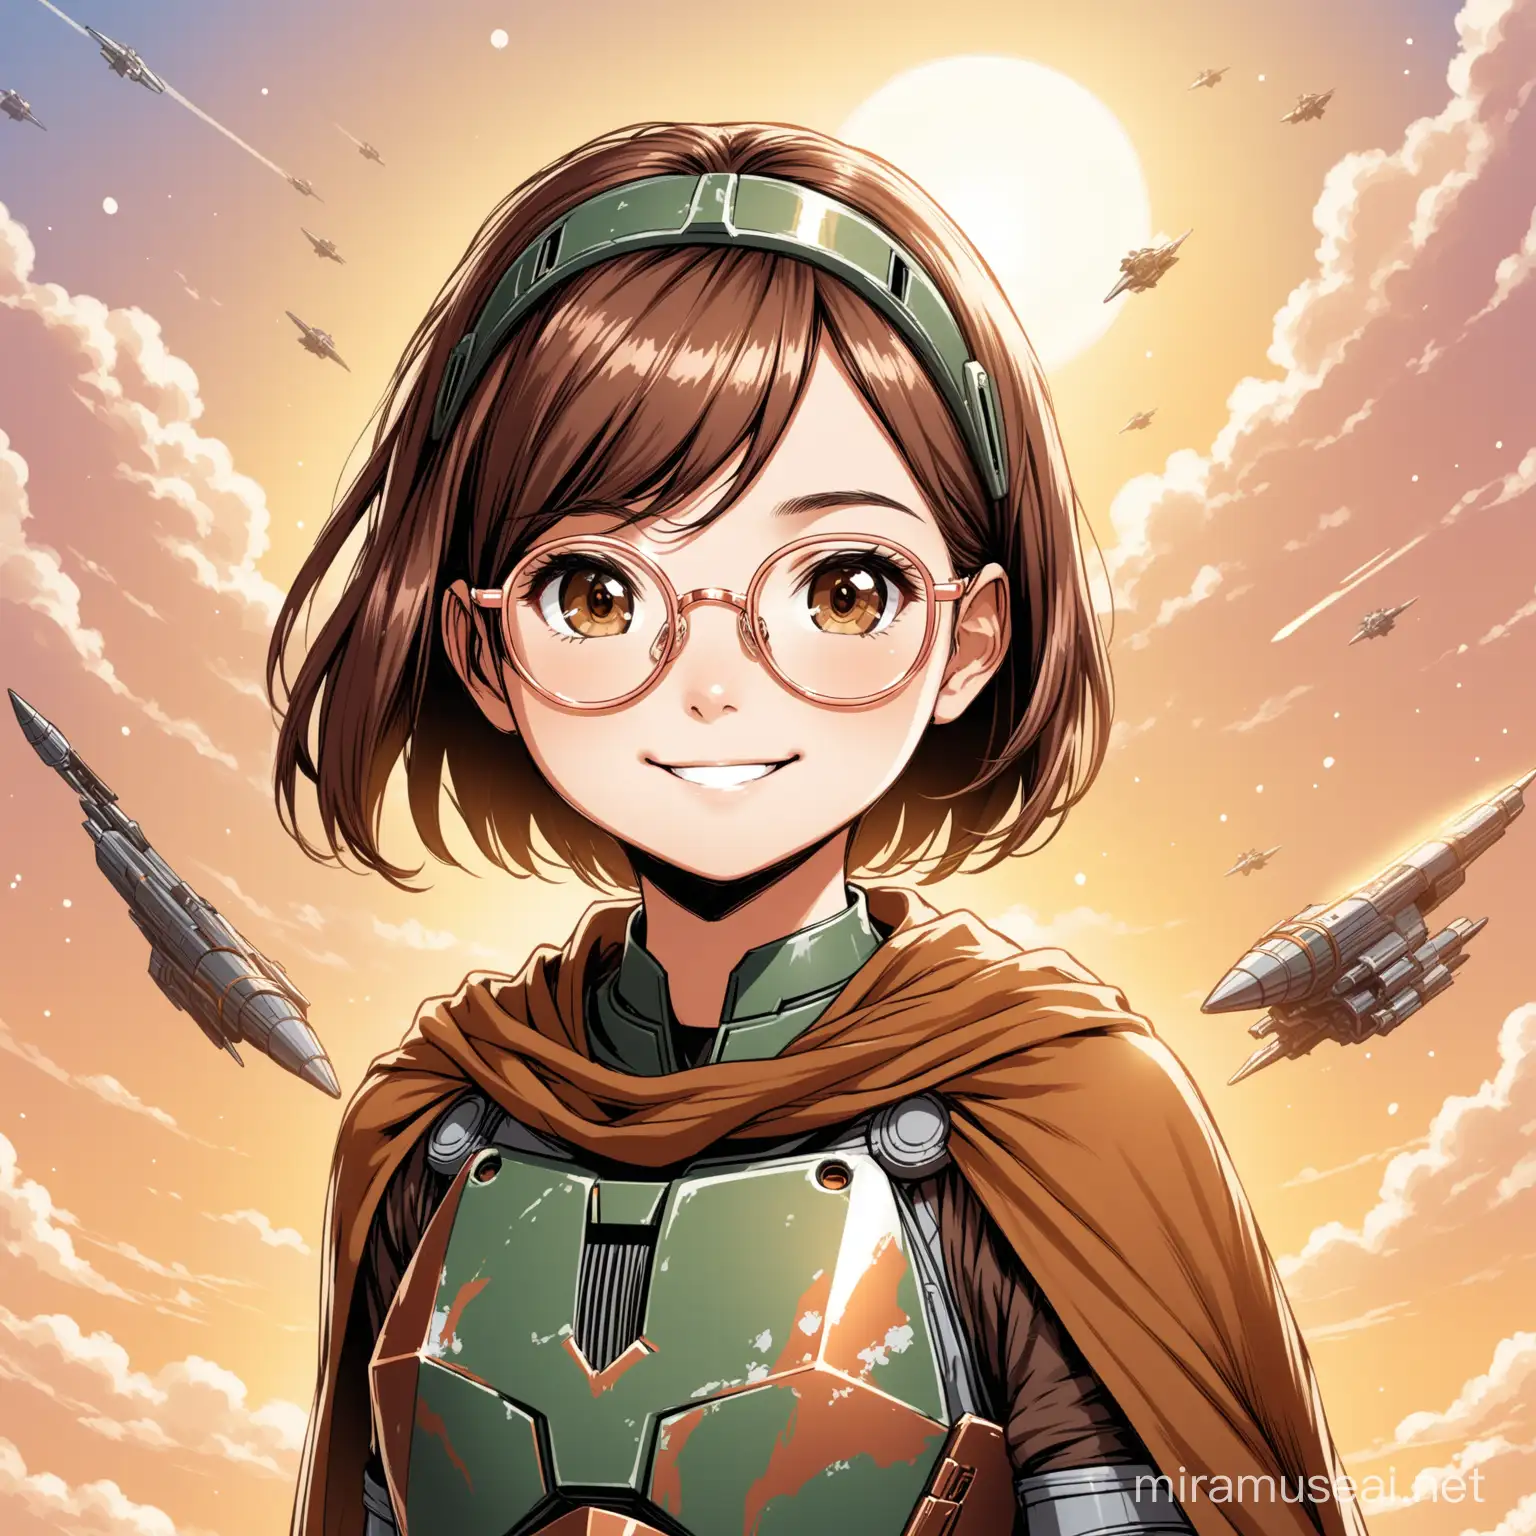 12 year old girl, short brown hair, rose gold glasses, brown eyes, smiling, headband, wearing Mandalorian armour, cape, flying the razor crest